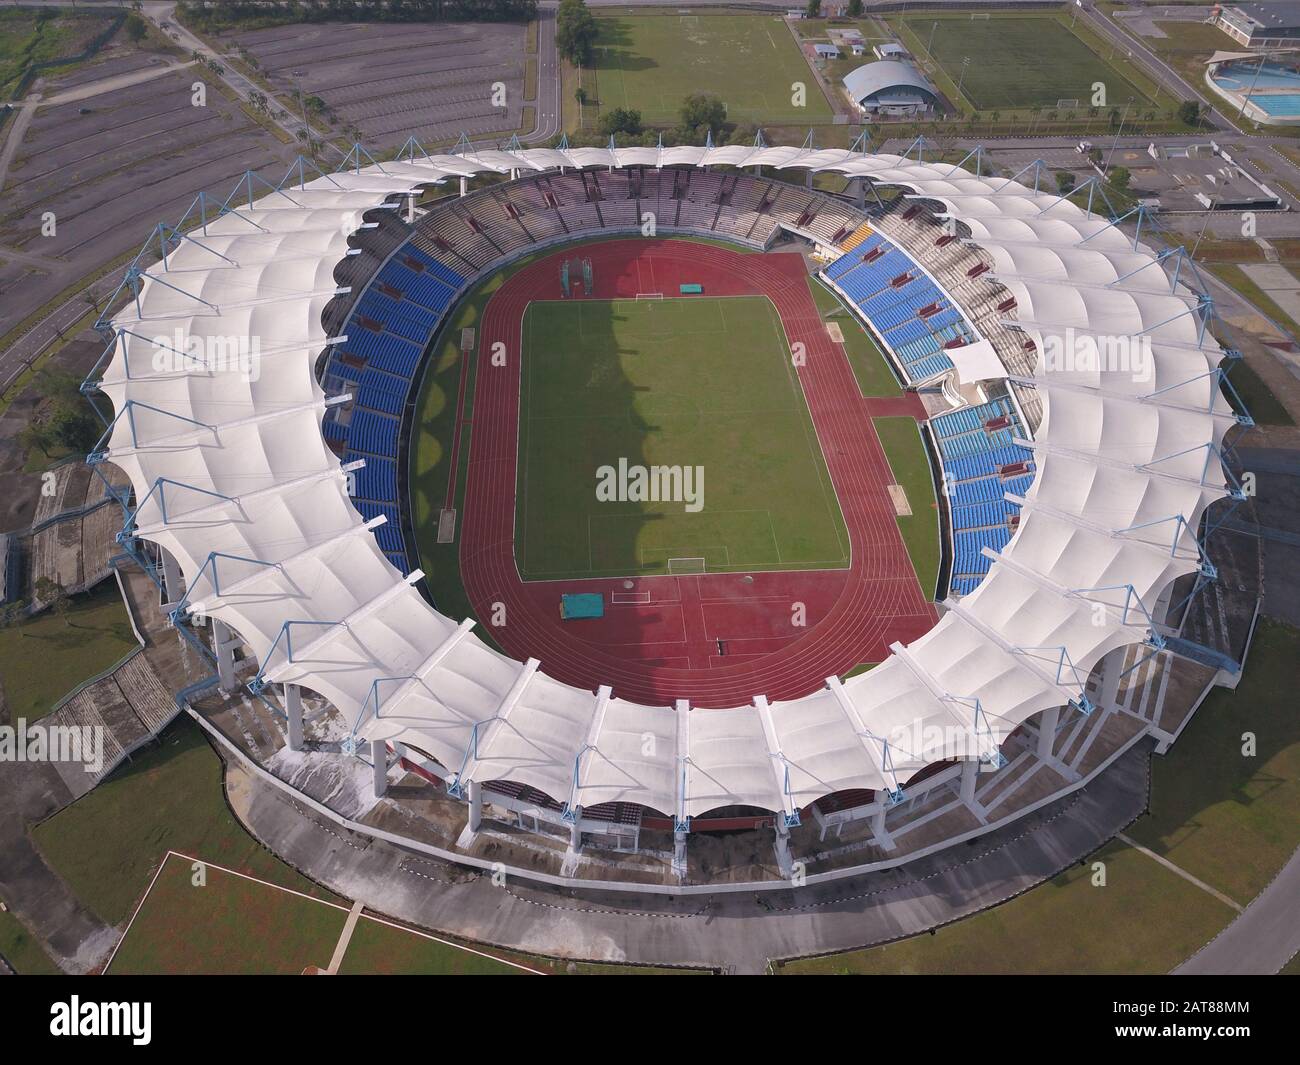 Kuching, Sarawak / Malaysia - December 1 2019: The Outdoor Sarawak State Stadiums where all the national outdoor sports and events take place Stock Photo